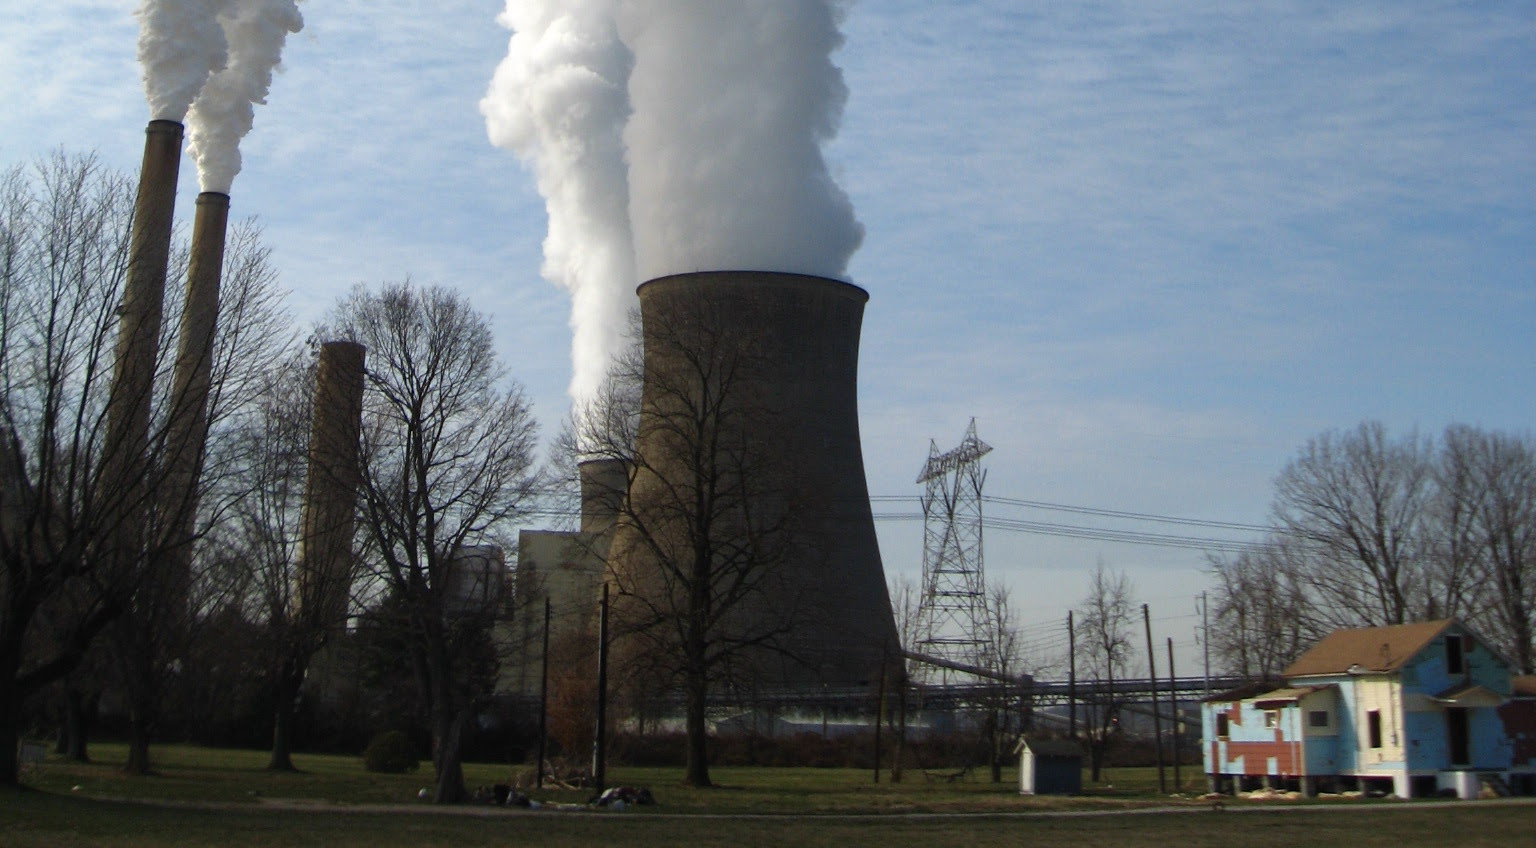 Pictured: Gavin Coal Plant in Cheshire, OH. Photo credit: dana-k, Flickr, CC BY 2.0 DEED.